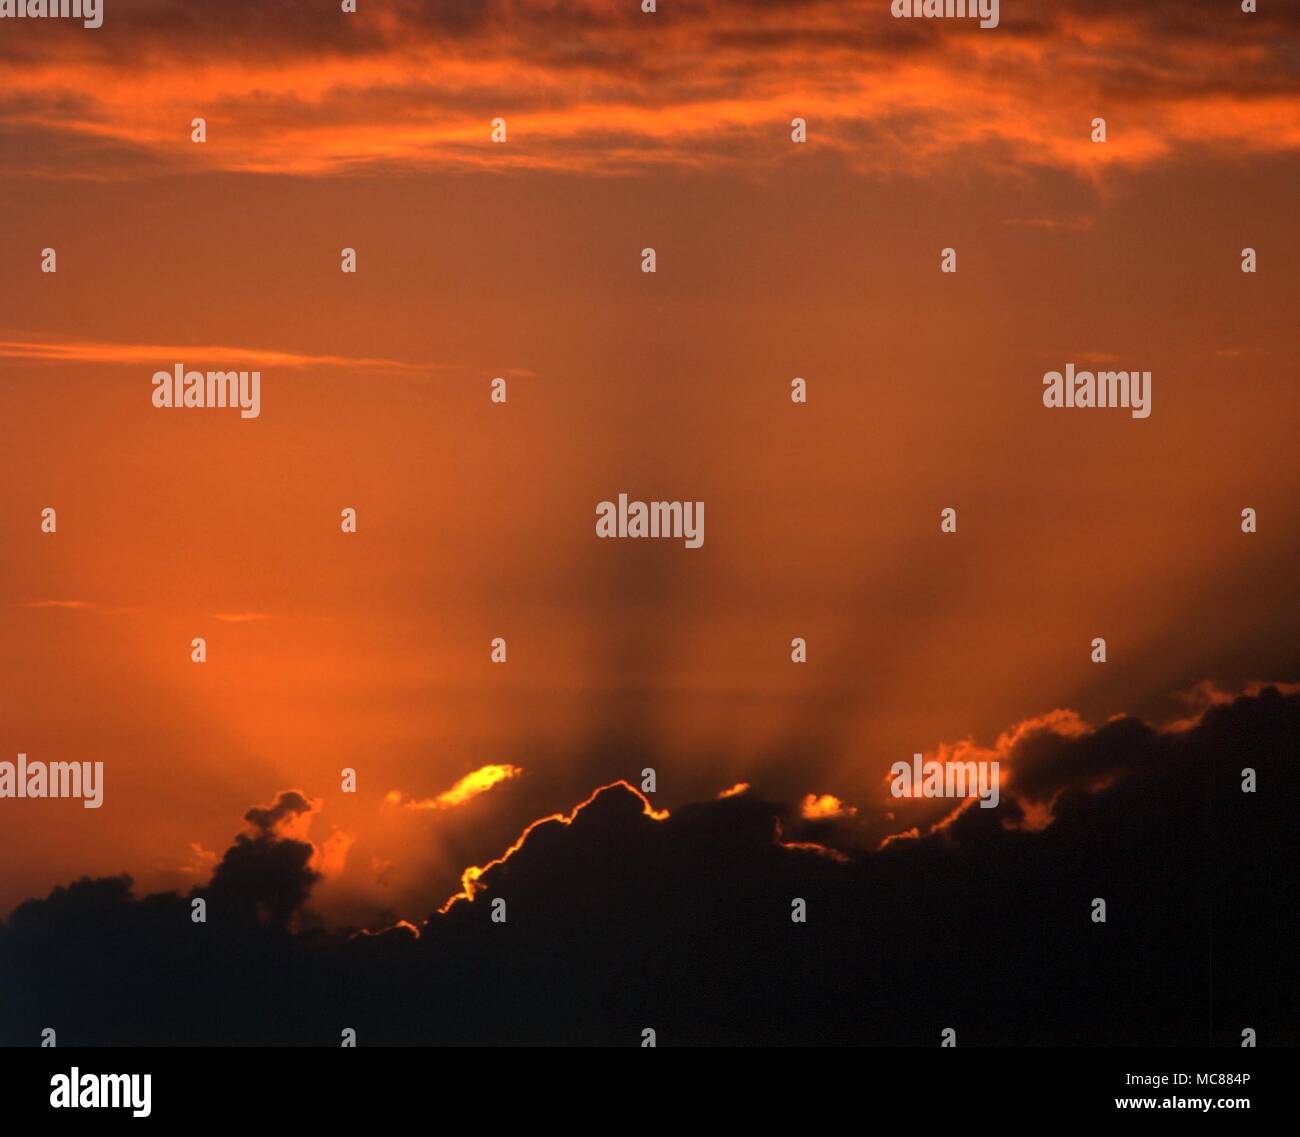 Moods of nature. Clouds at sunset with silver lining Stock Photo